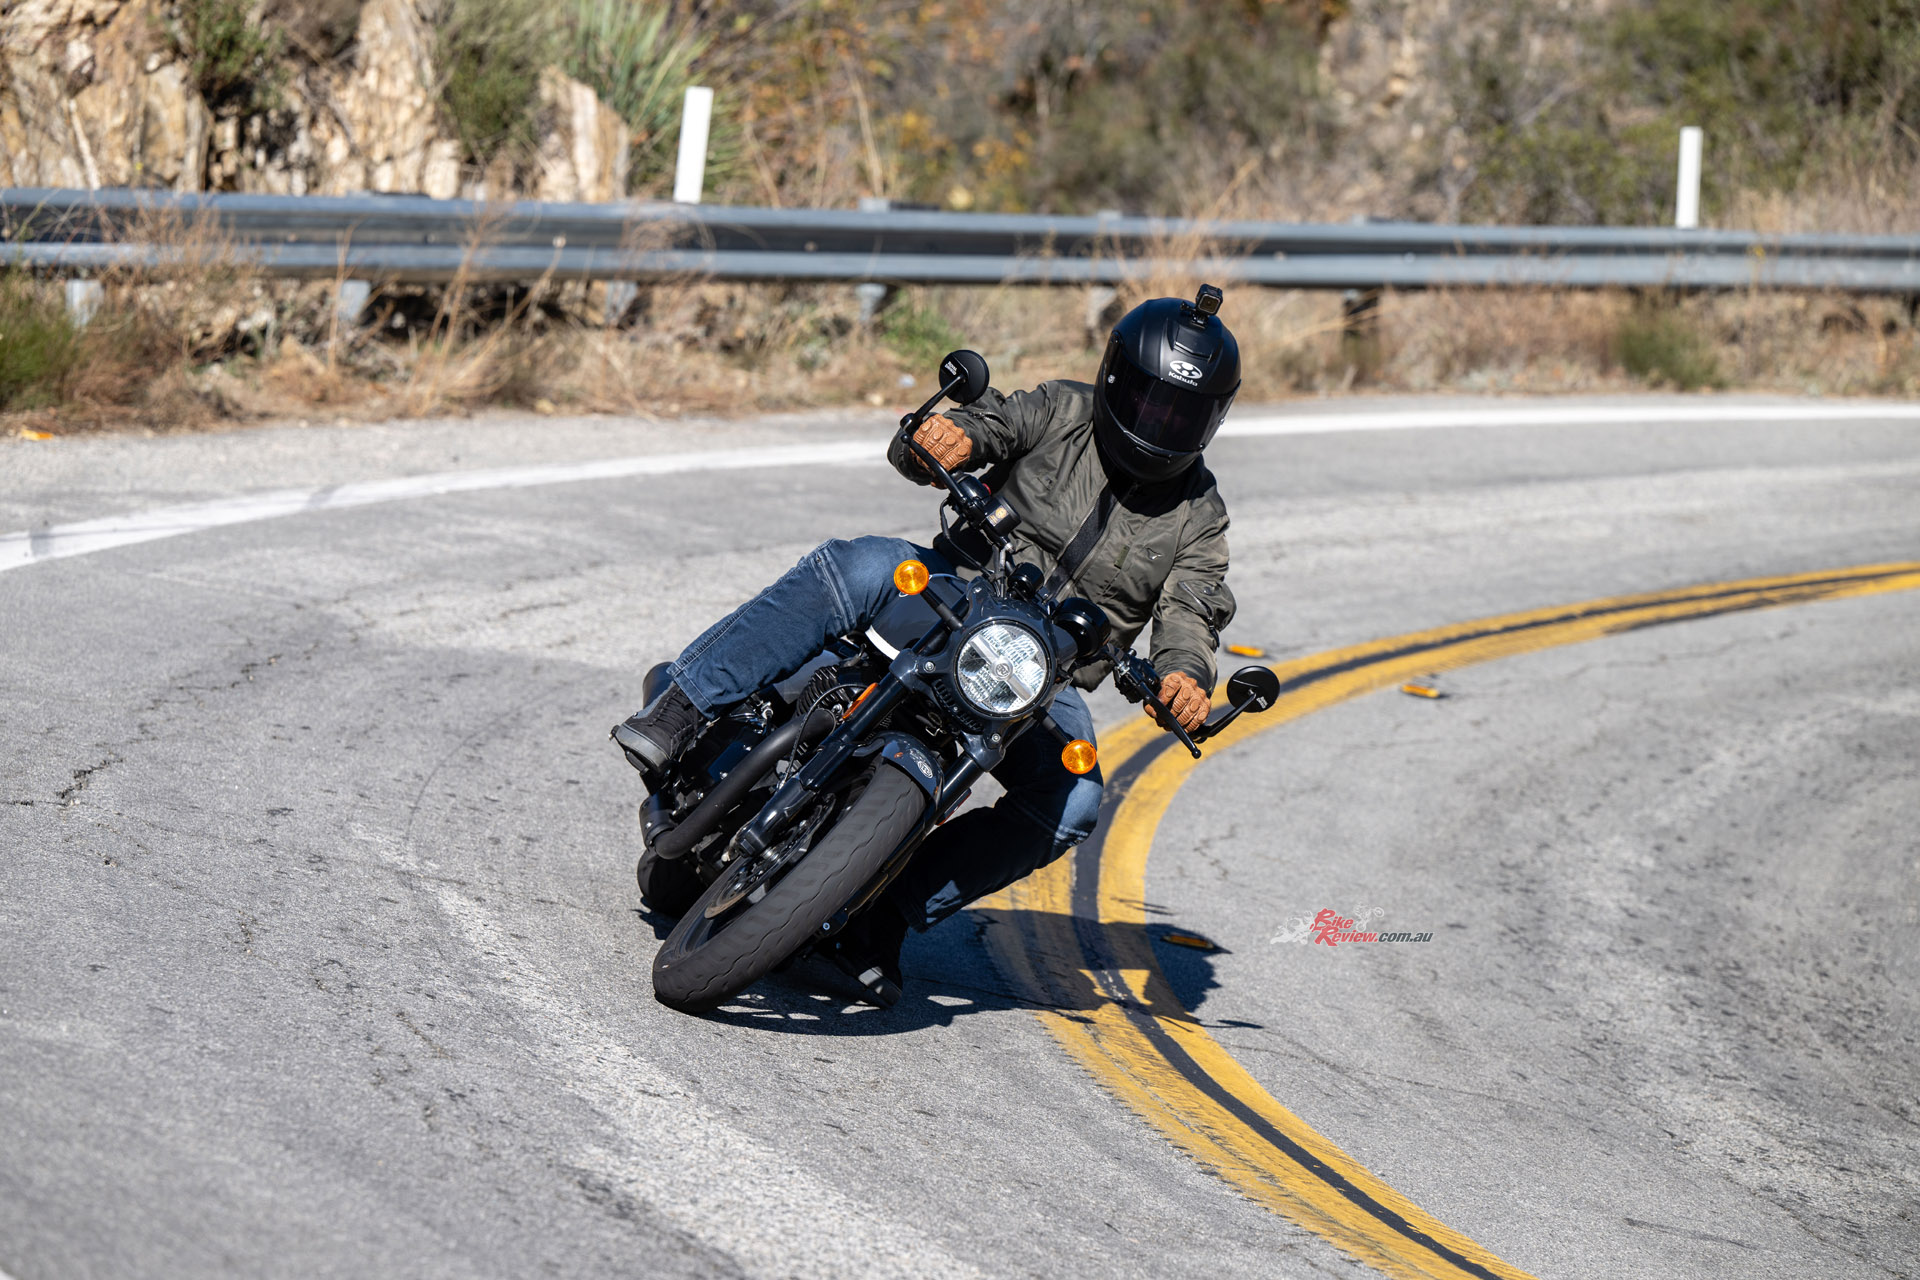 The Shotgun 650 handles well enough to give those after some cornering thrills, and more experienced riders, enough of a buzz between cruising and commuting. 